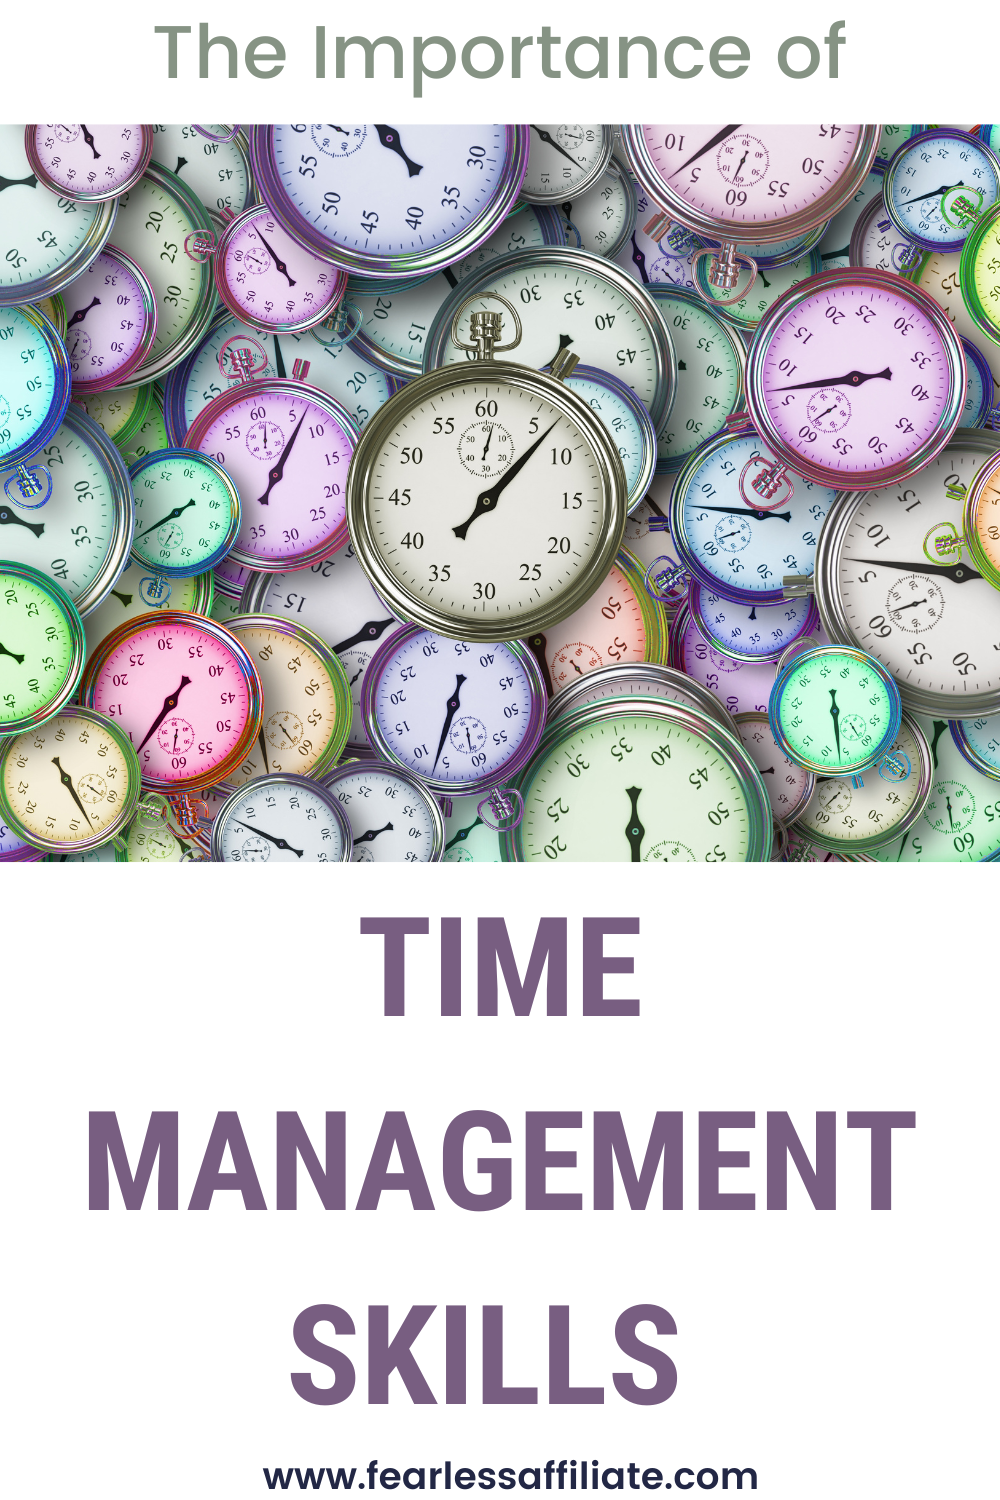 The Importance of Time Management Skills